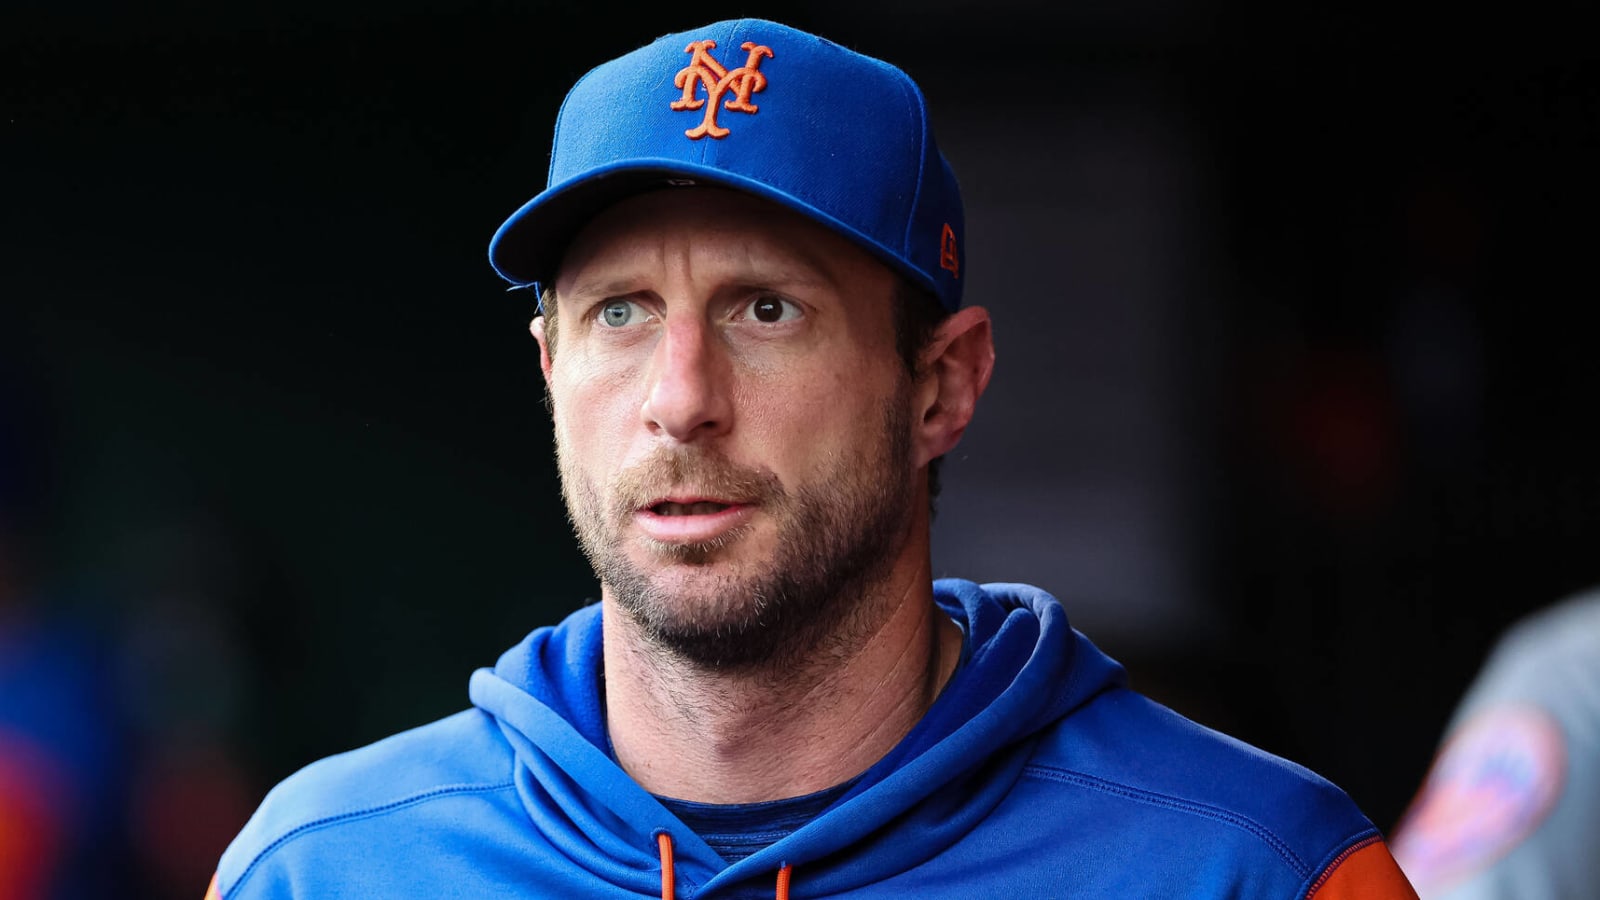 Max Scherzer '90%' recovered; no timetable for return